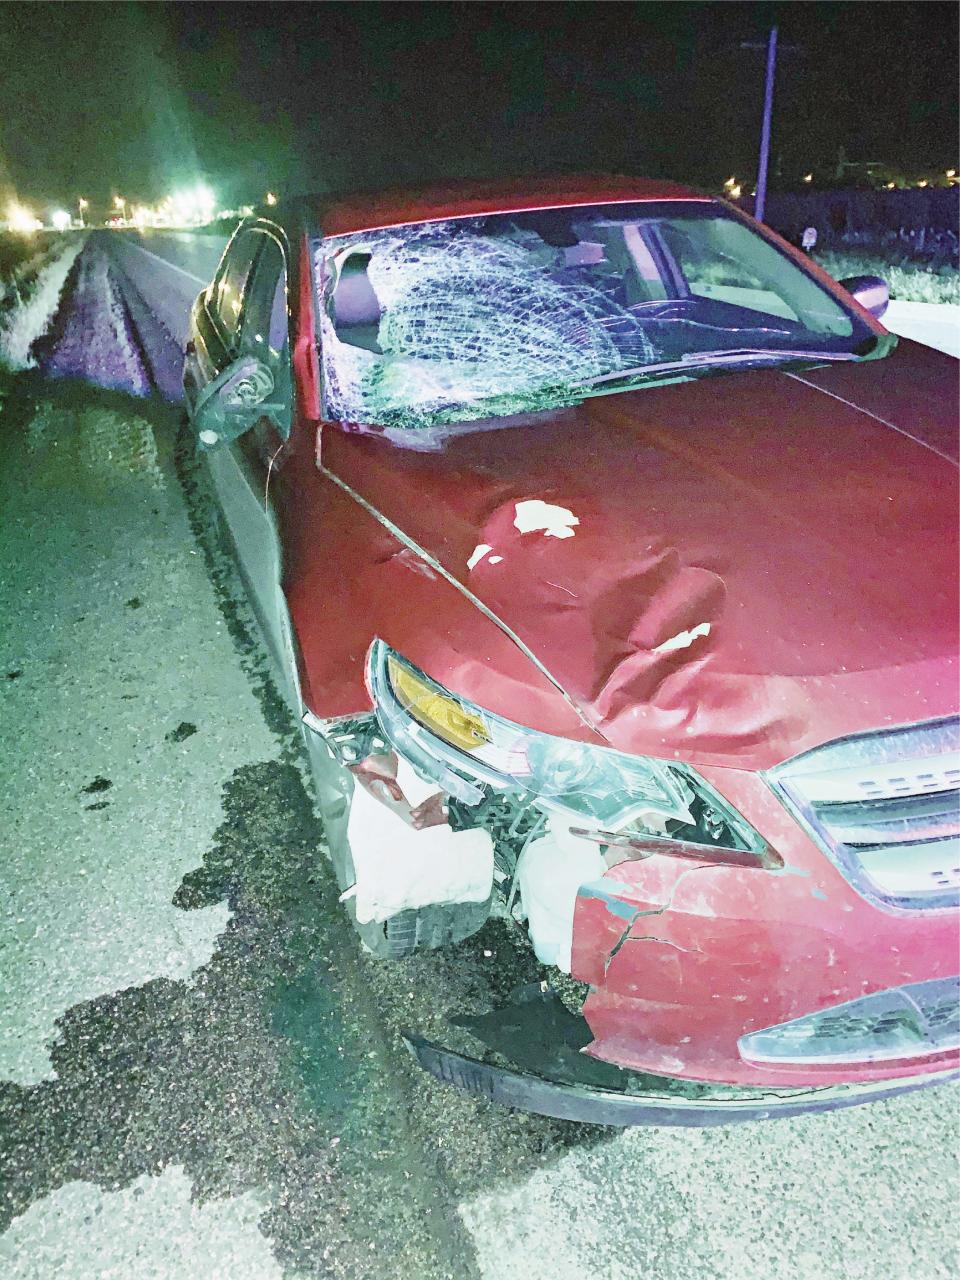 A photo from the investigative file of Jason Ravnsborg shows his car after the crash.